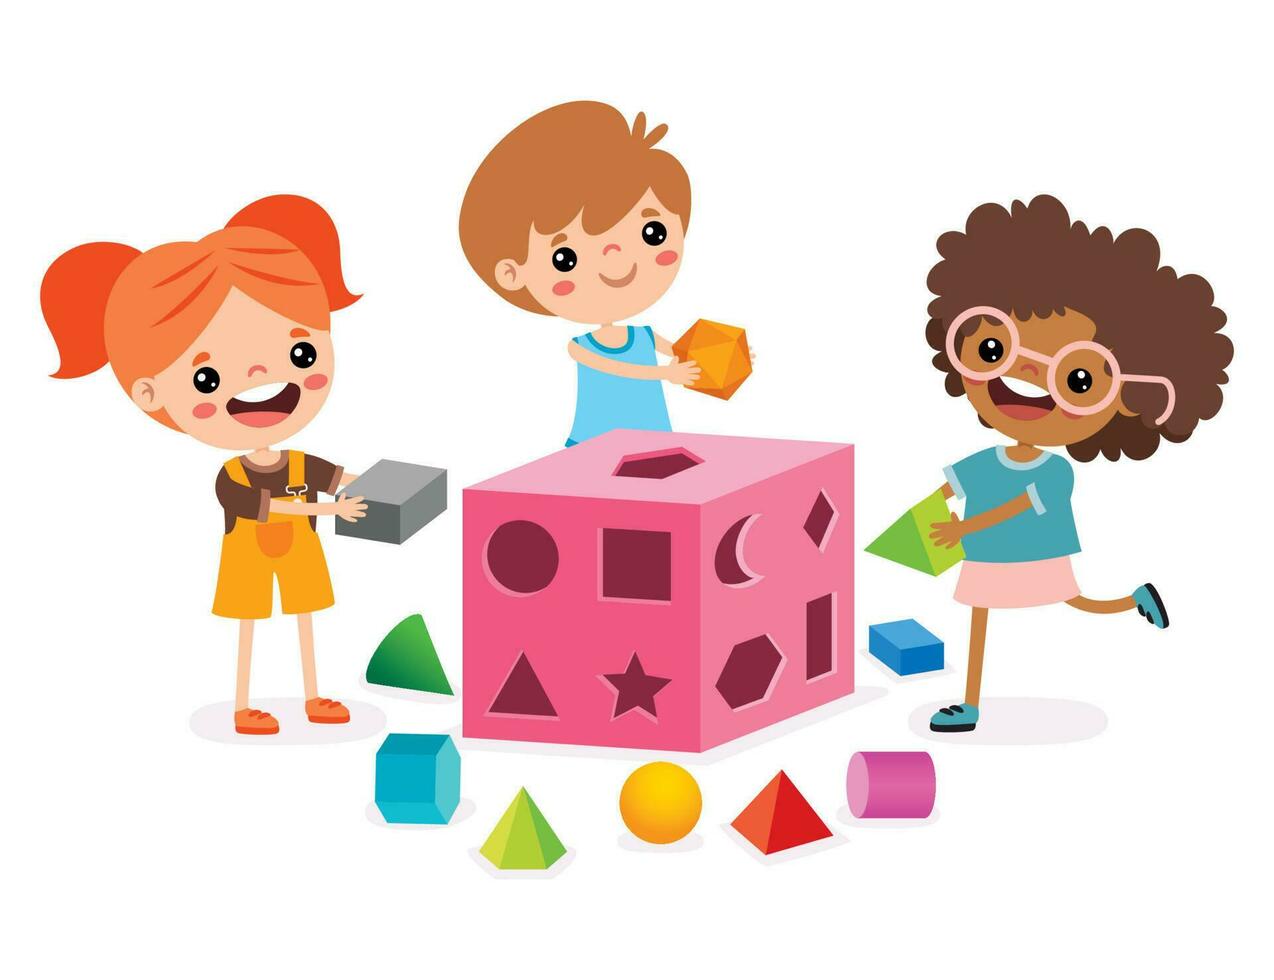 Kids Playing With Shape Sorter Toy vector